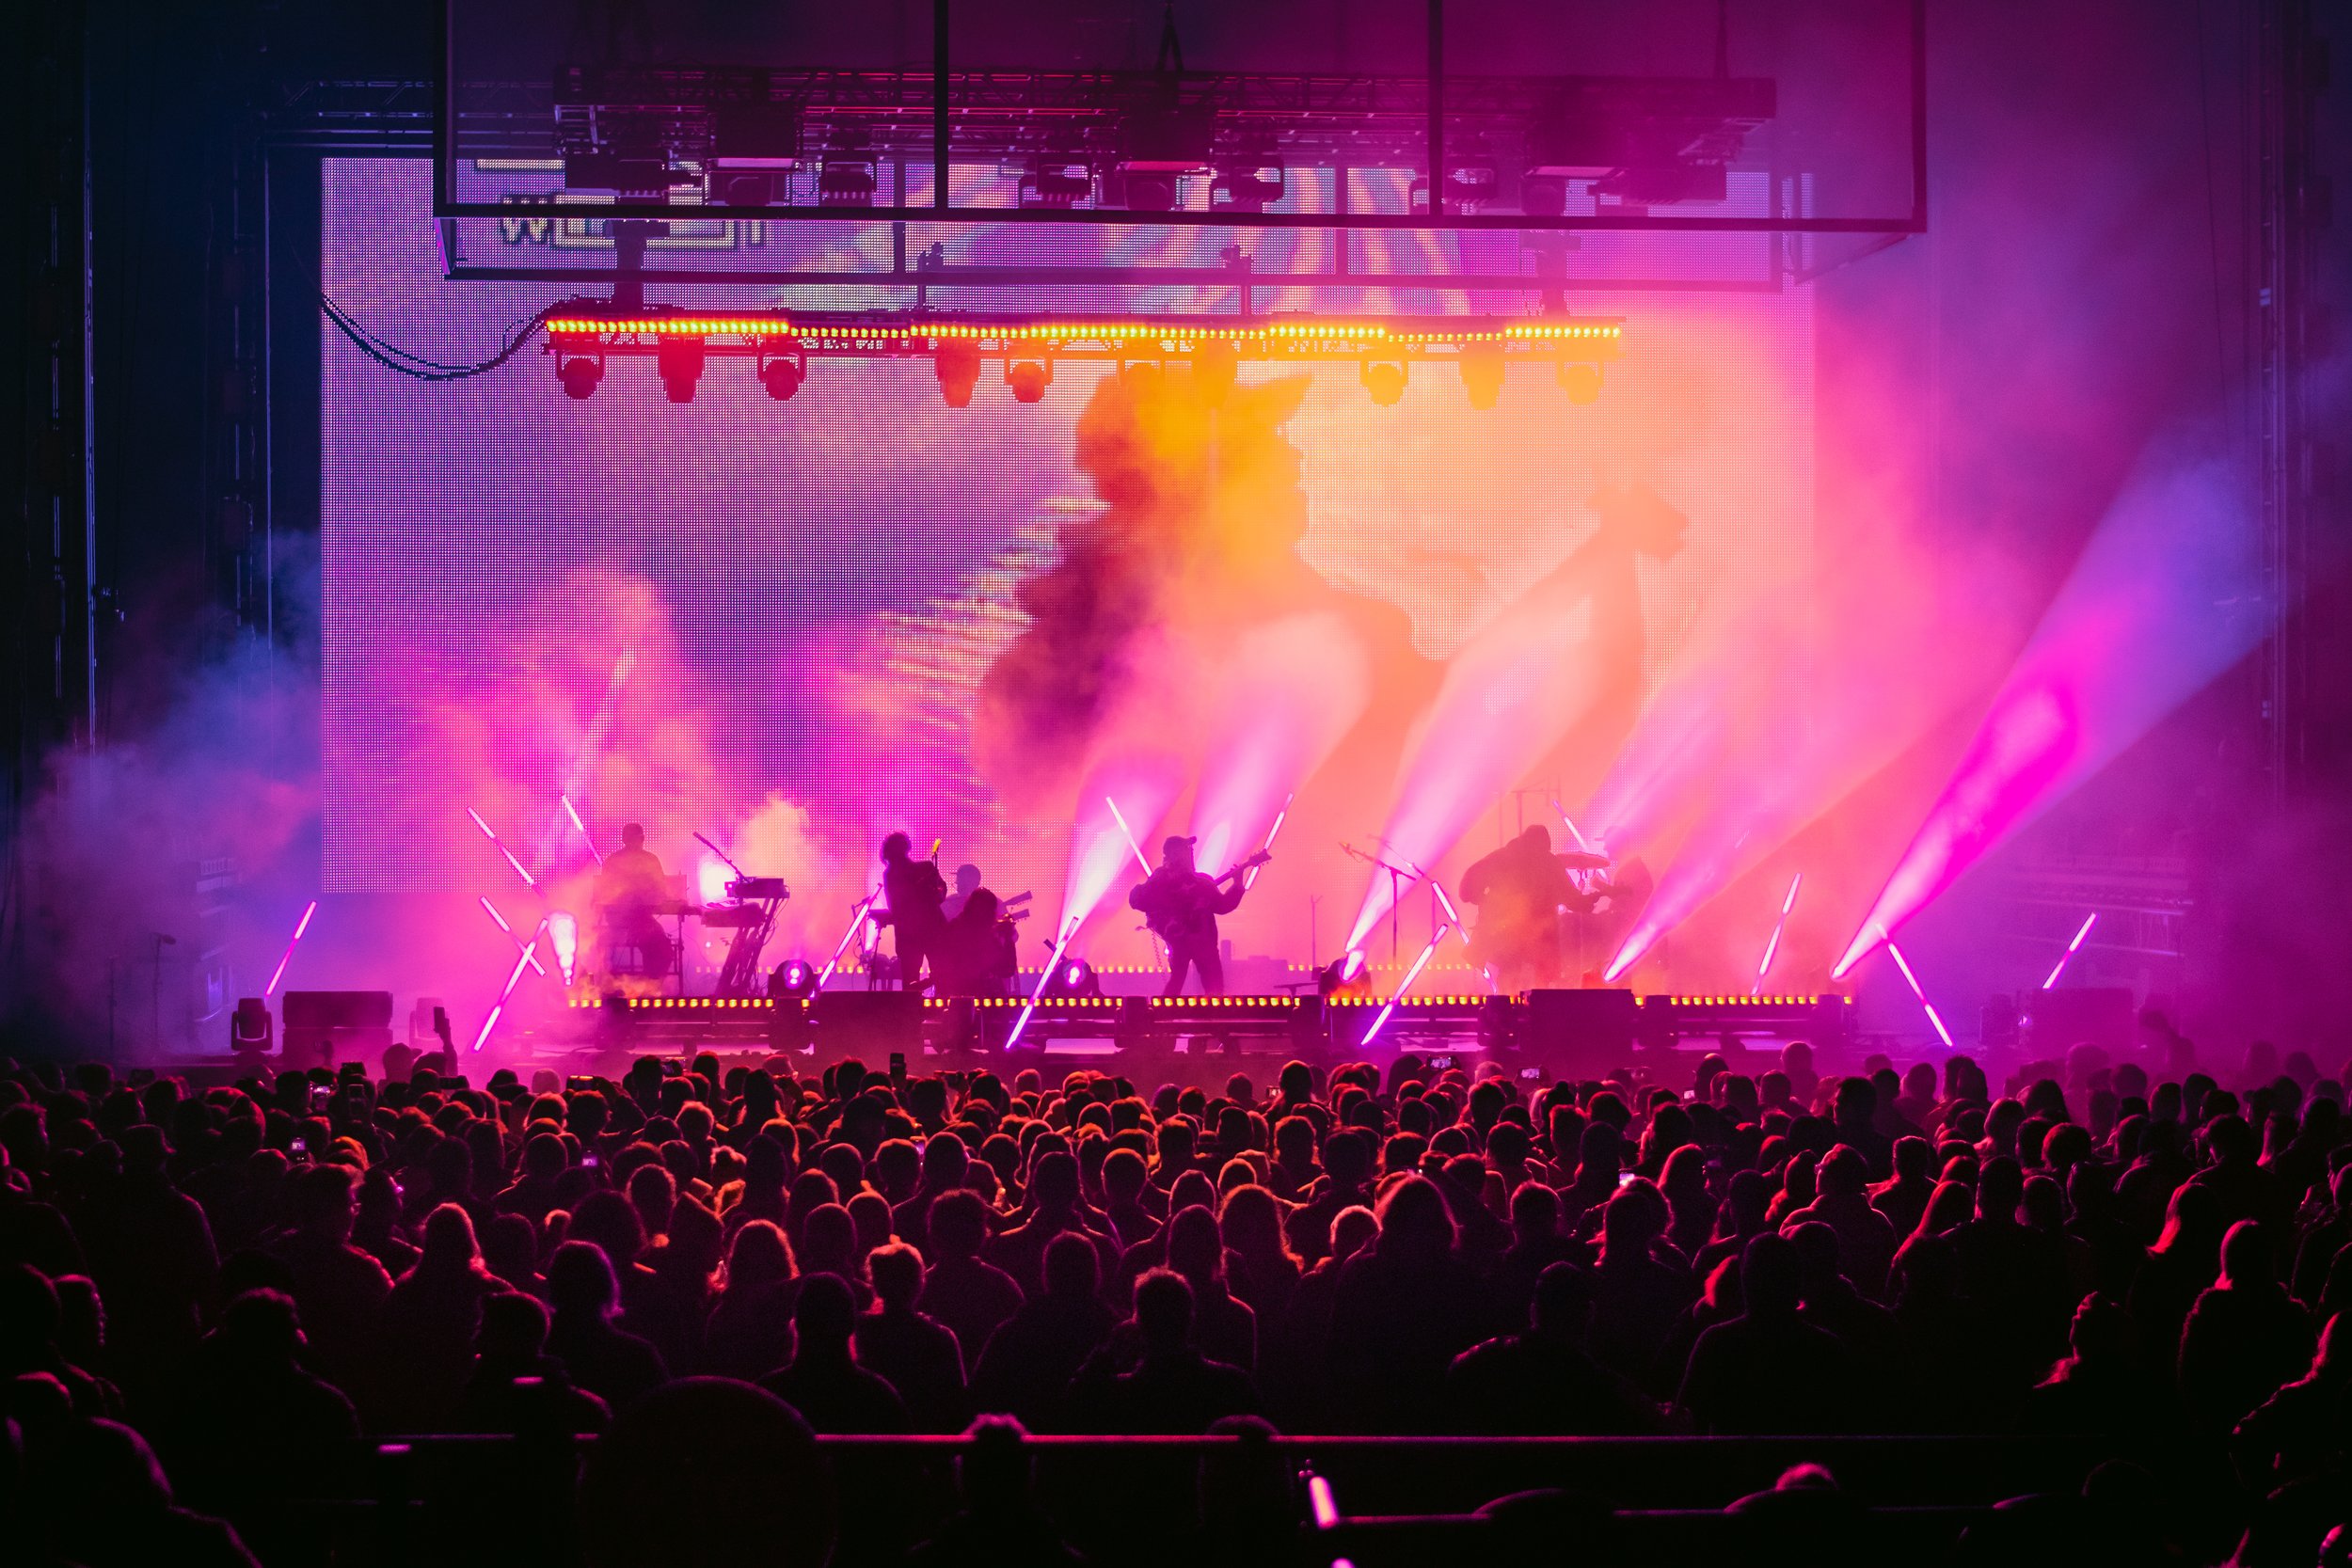  Portugal. The Man rocks the crowd with their energetic performance on a polychromatic stage. 